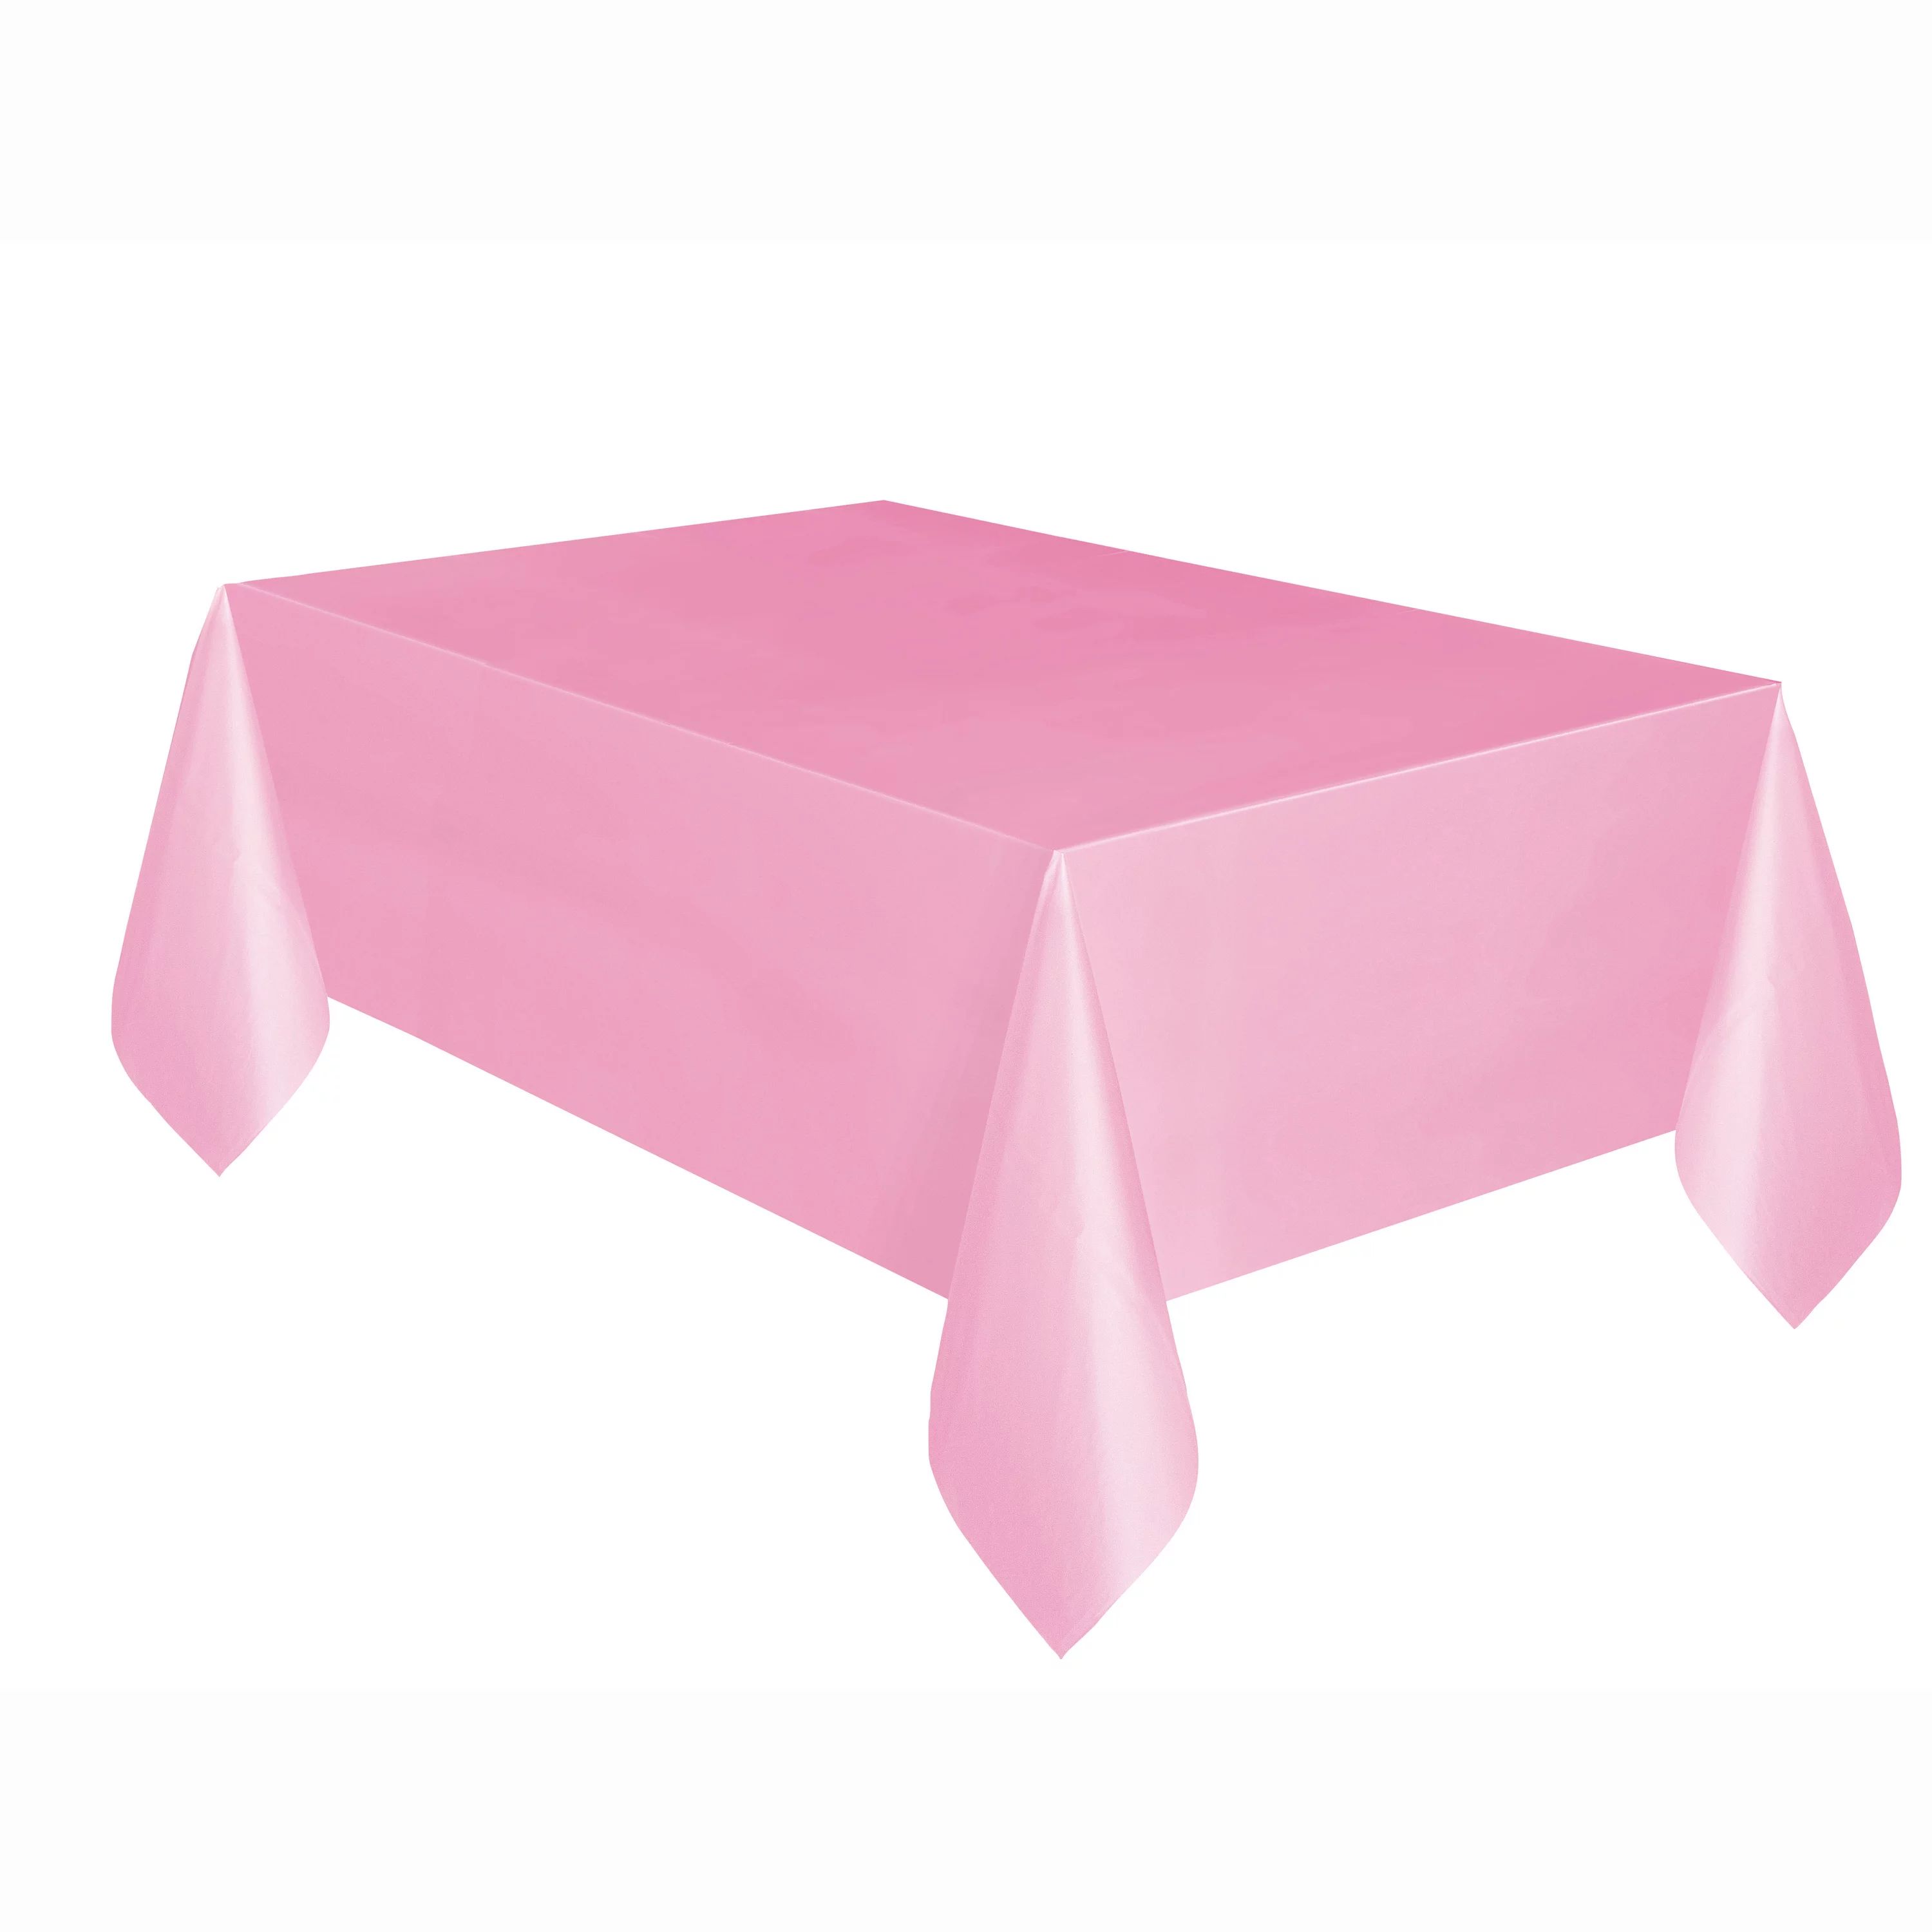 Way to Celebrate! Light Pink Plastic Party Tablecloth, 108in x 54in | Walmart (US)